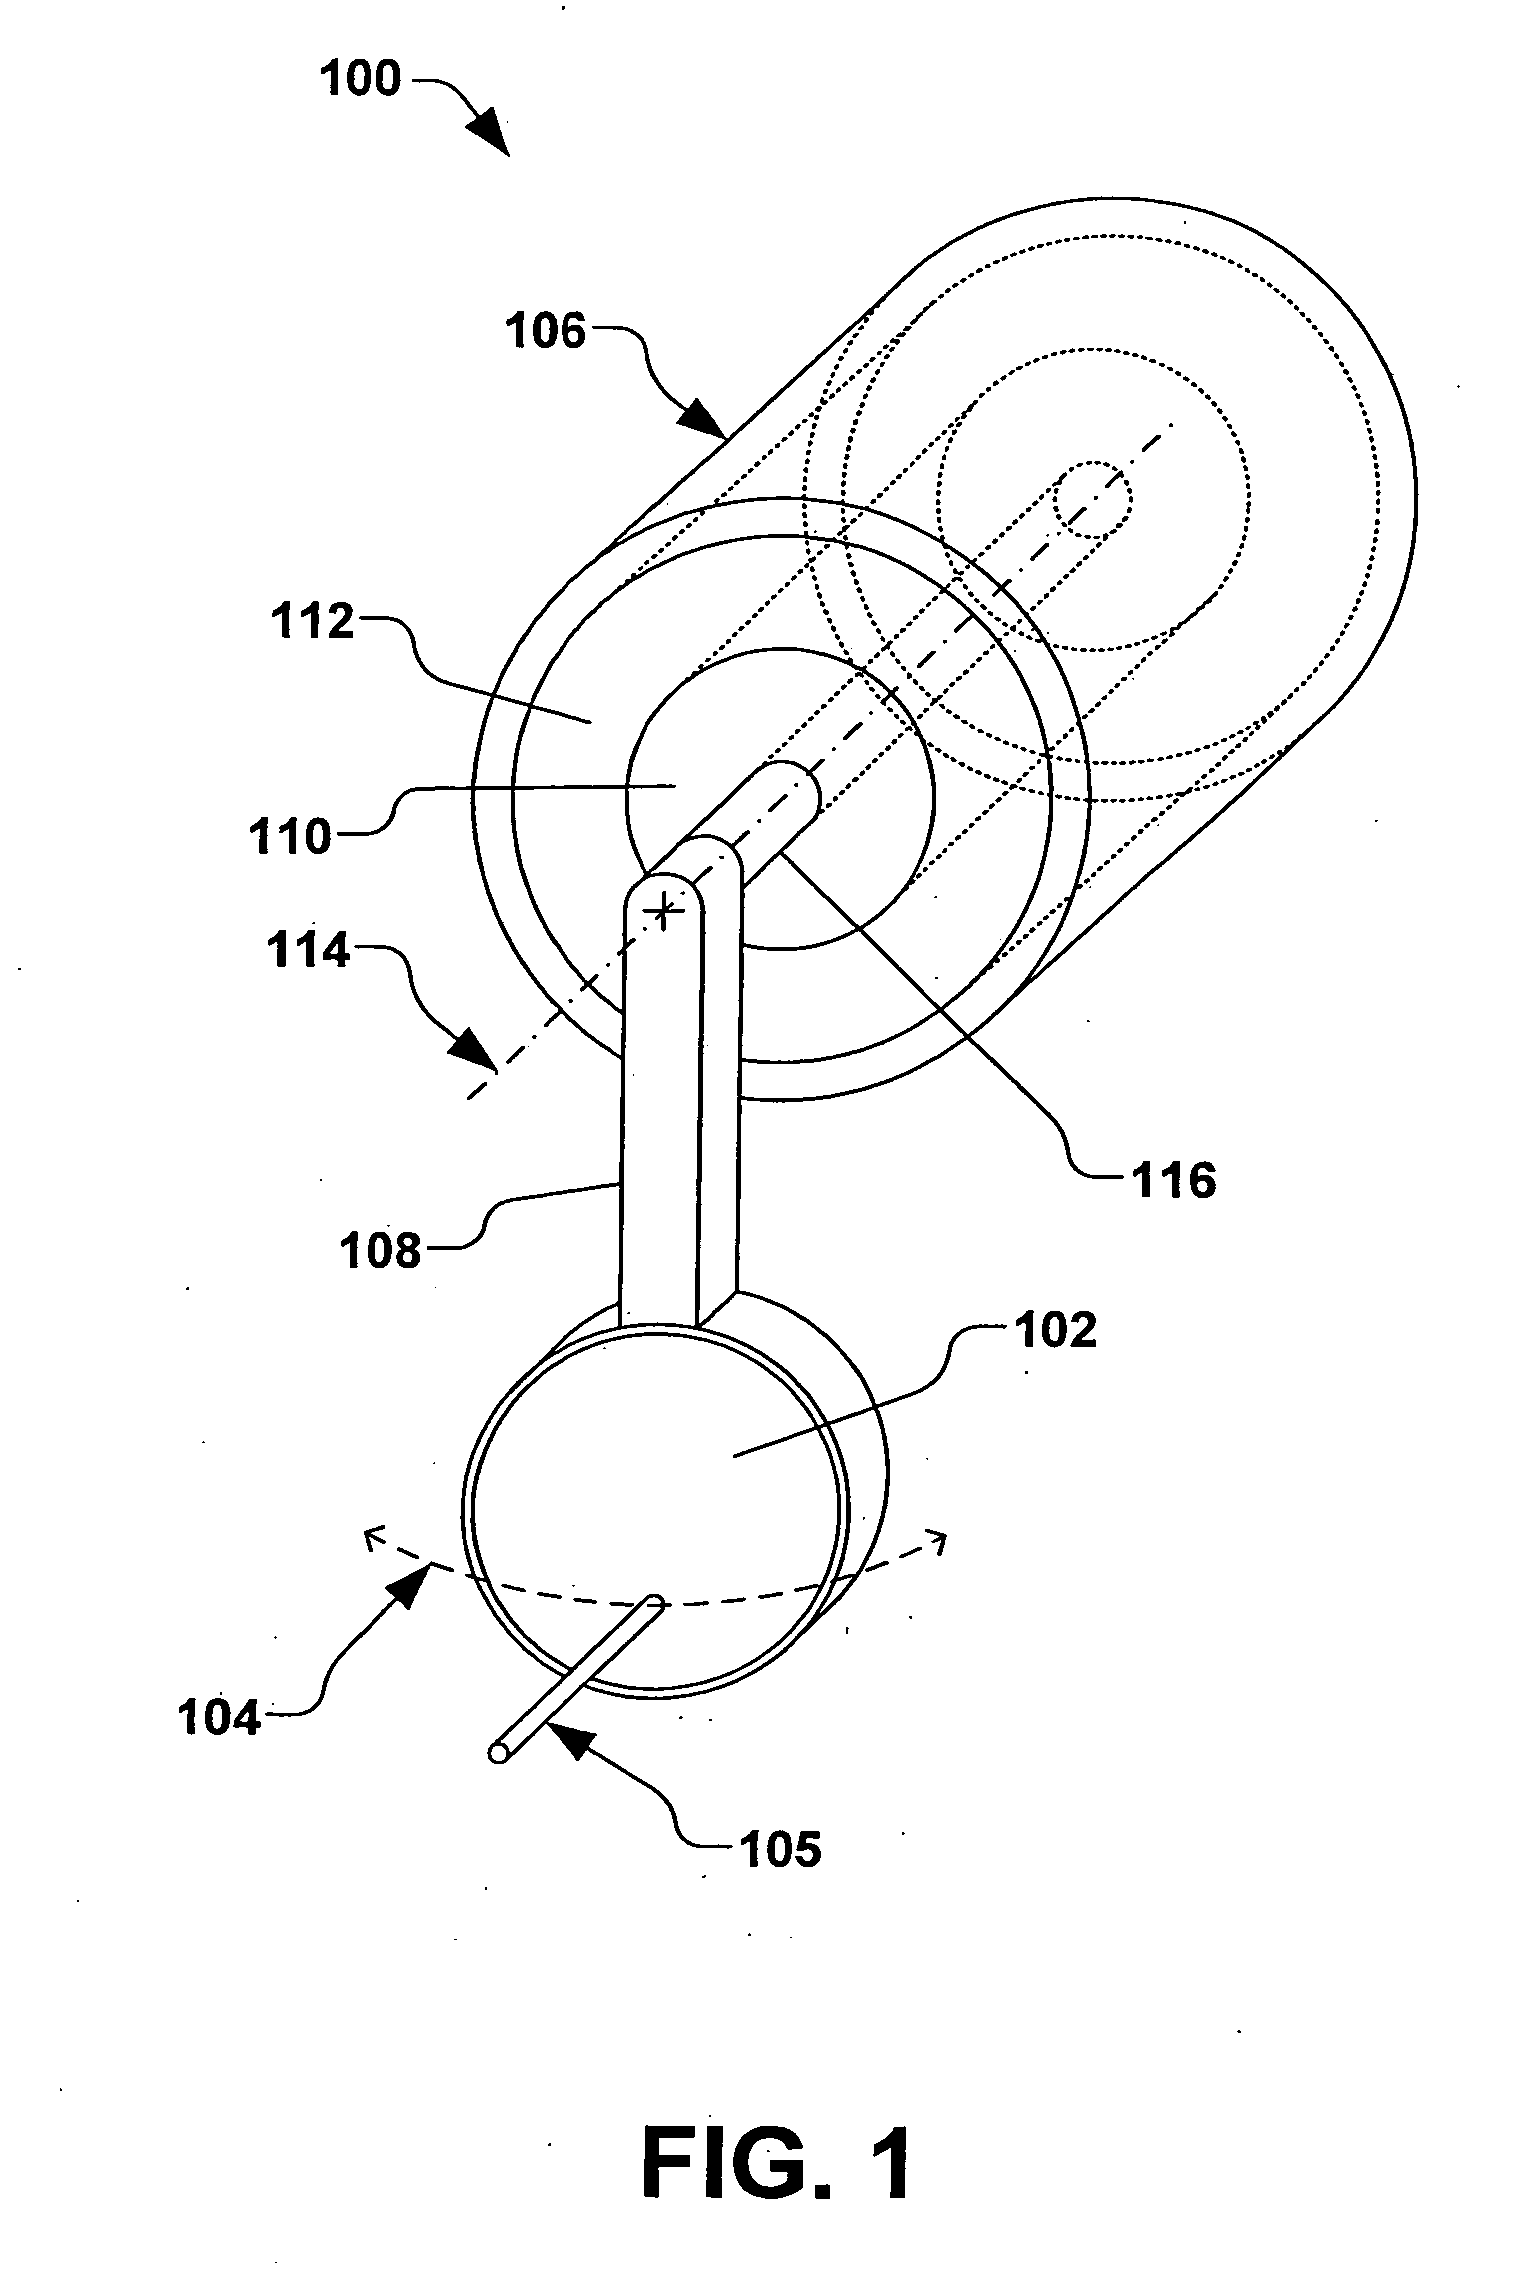 Method for reciprocating a workpiece through an ion beam